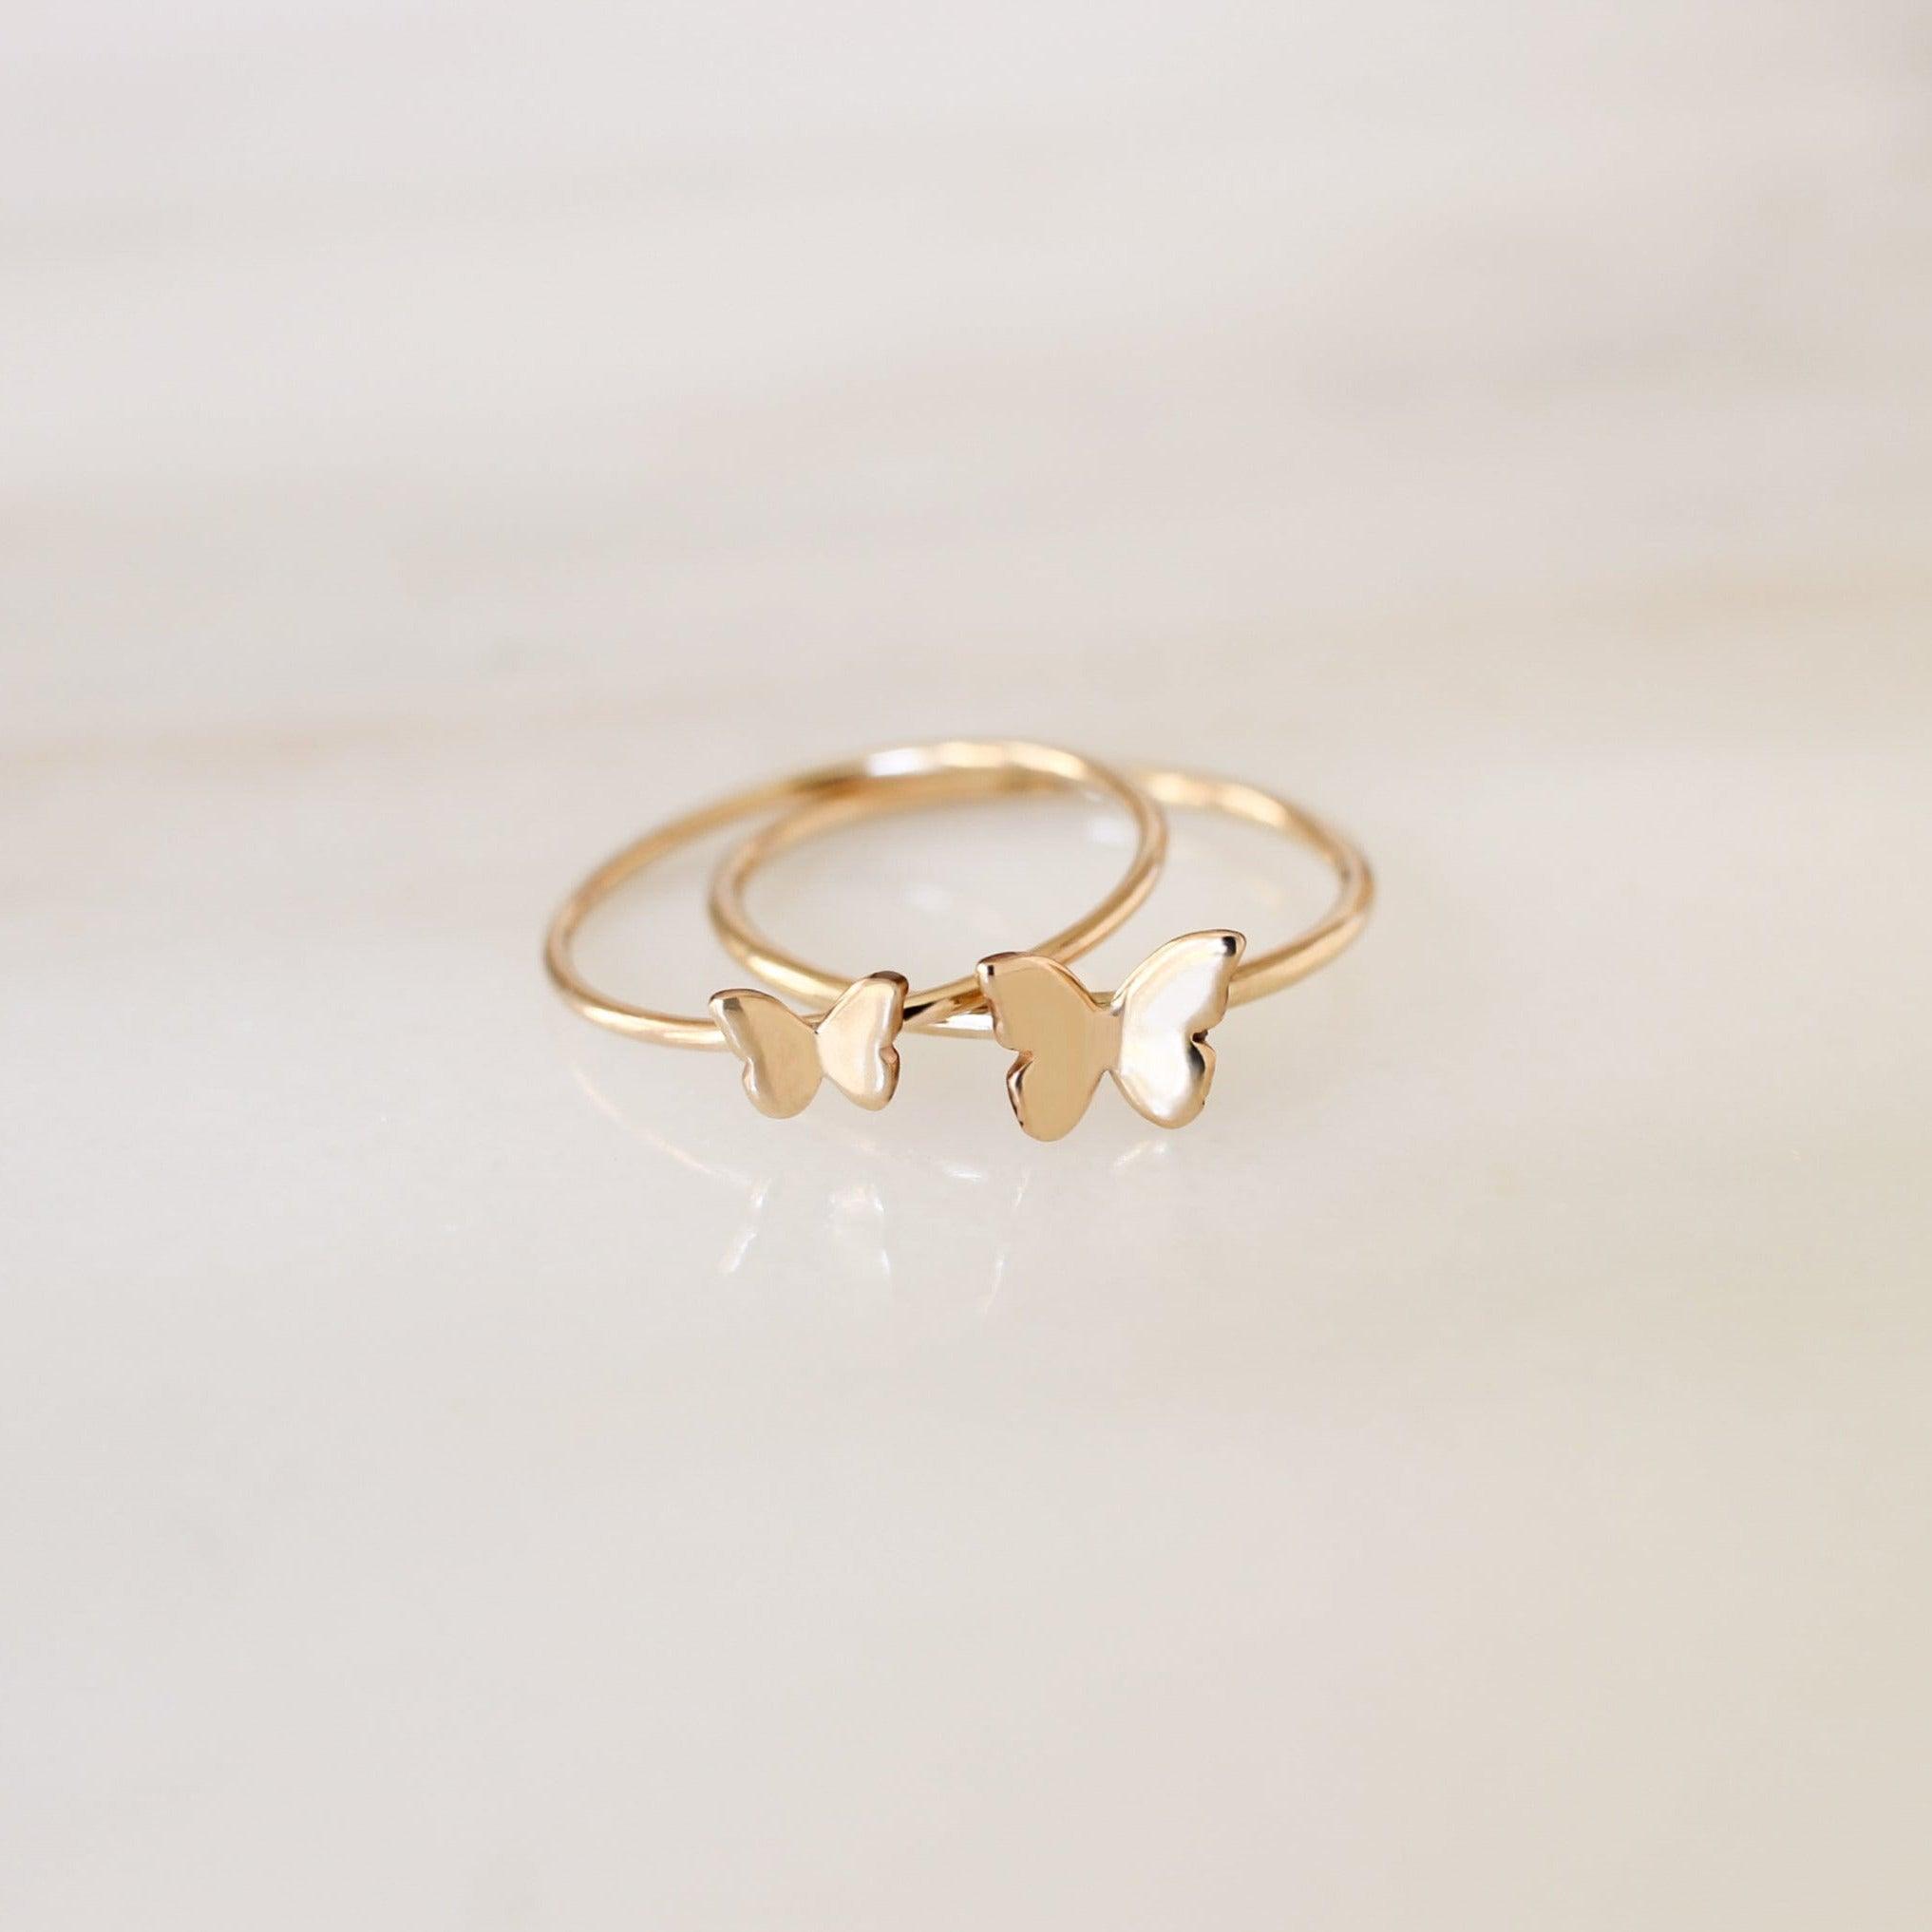 Butterfly Ring - Nolia Jewelry - Meaningful + Sustainably Handcrafted Jewelry